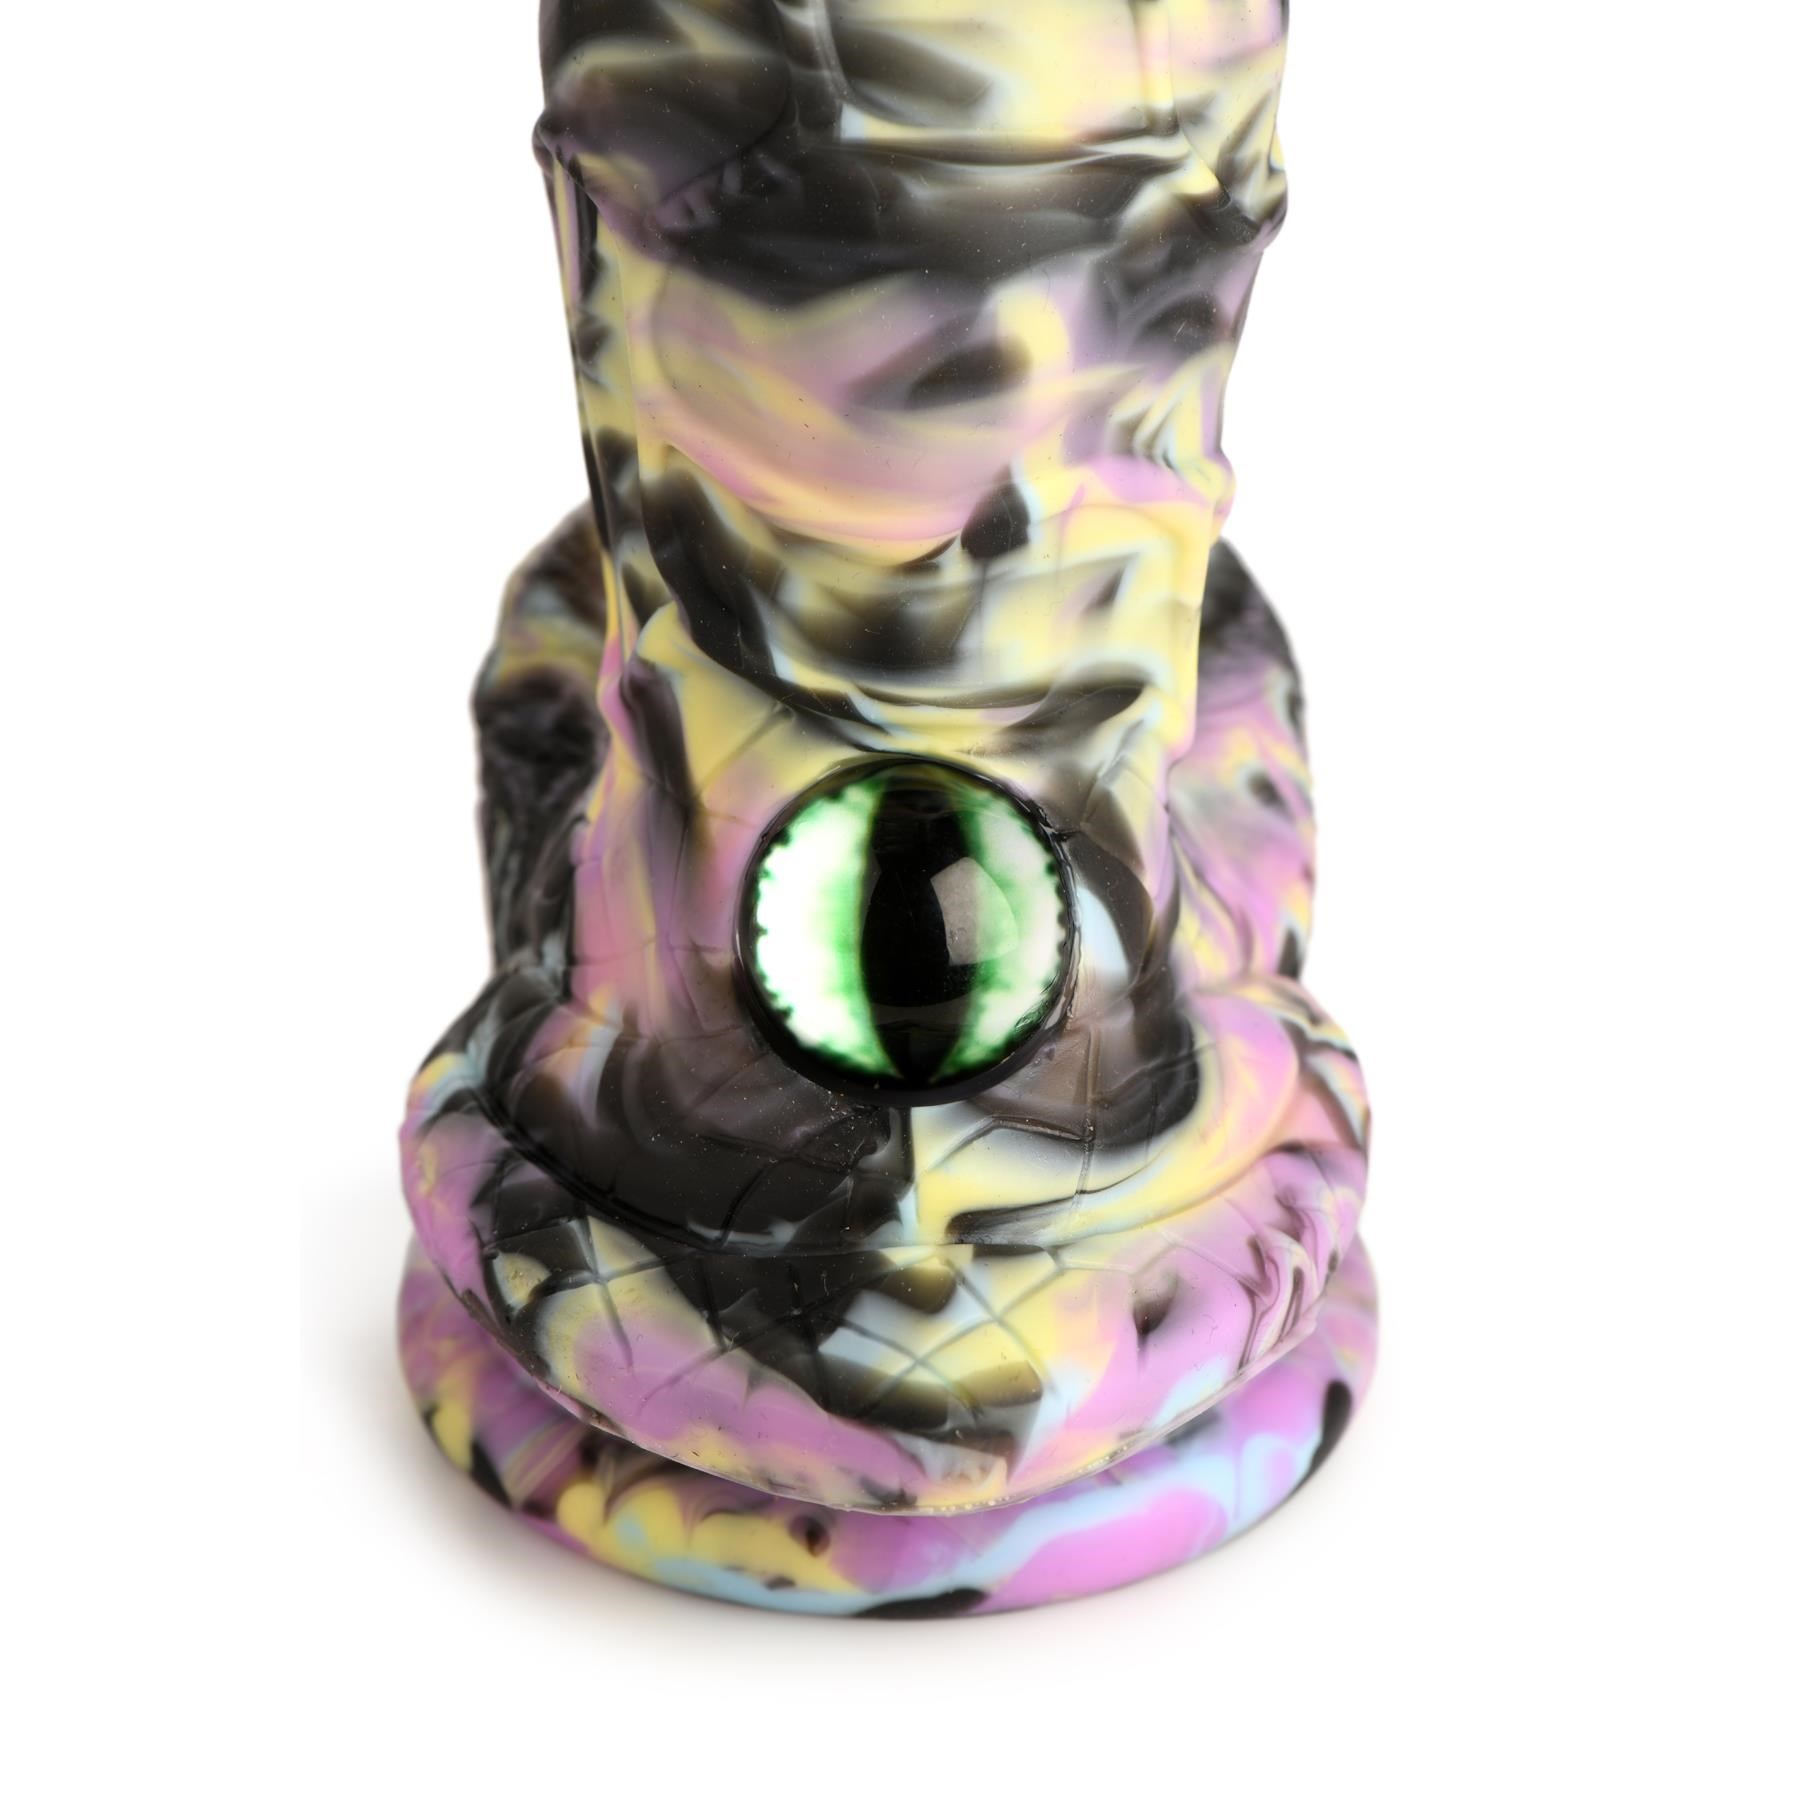 CreatureCocks Cyclops Monster Silicone Dildo - Product Shot #9 - Close Up On Eye